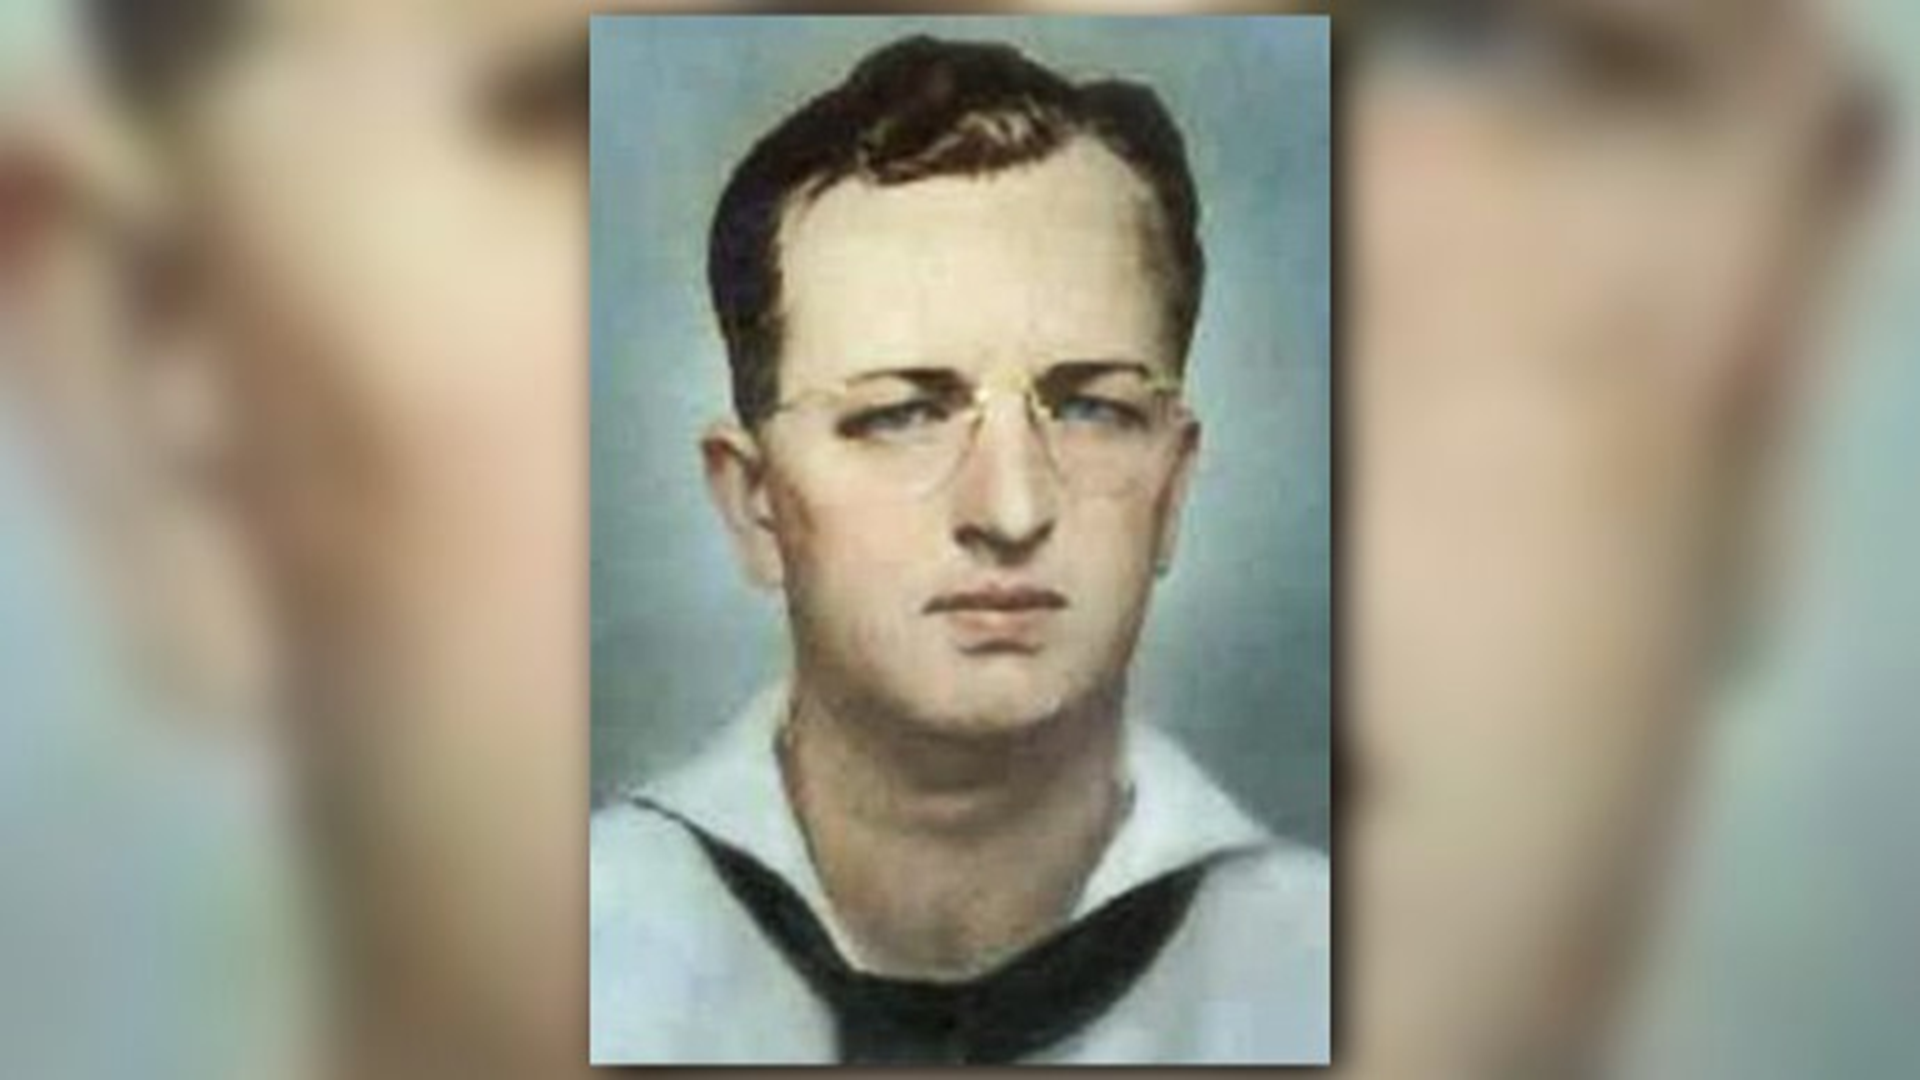 The remains of Navy Shipfitter 3rd Class John M. Donald will be laid to rest Thursday in Arlington Na